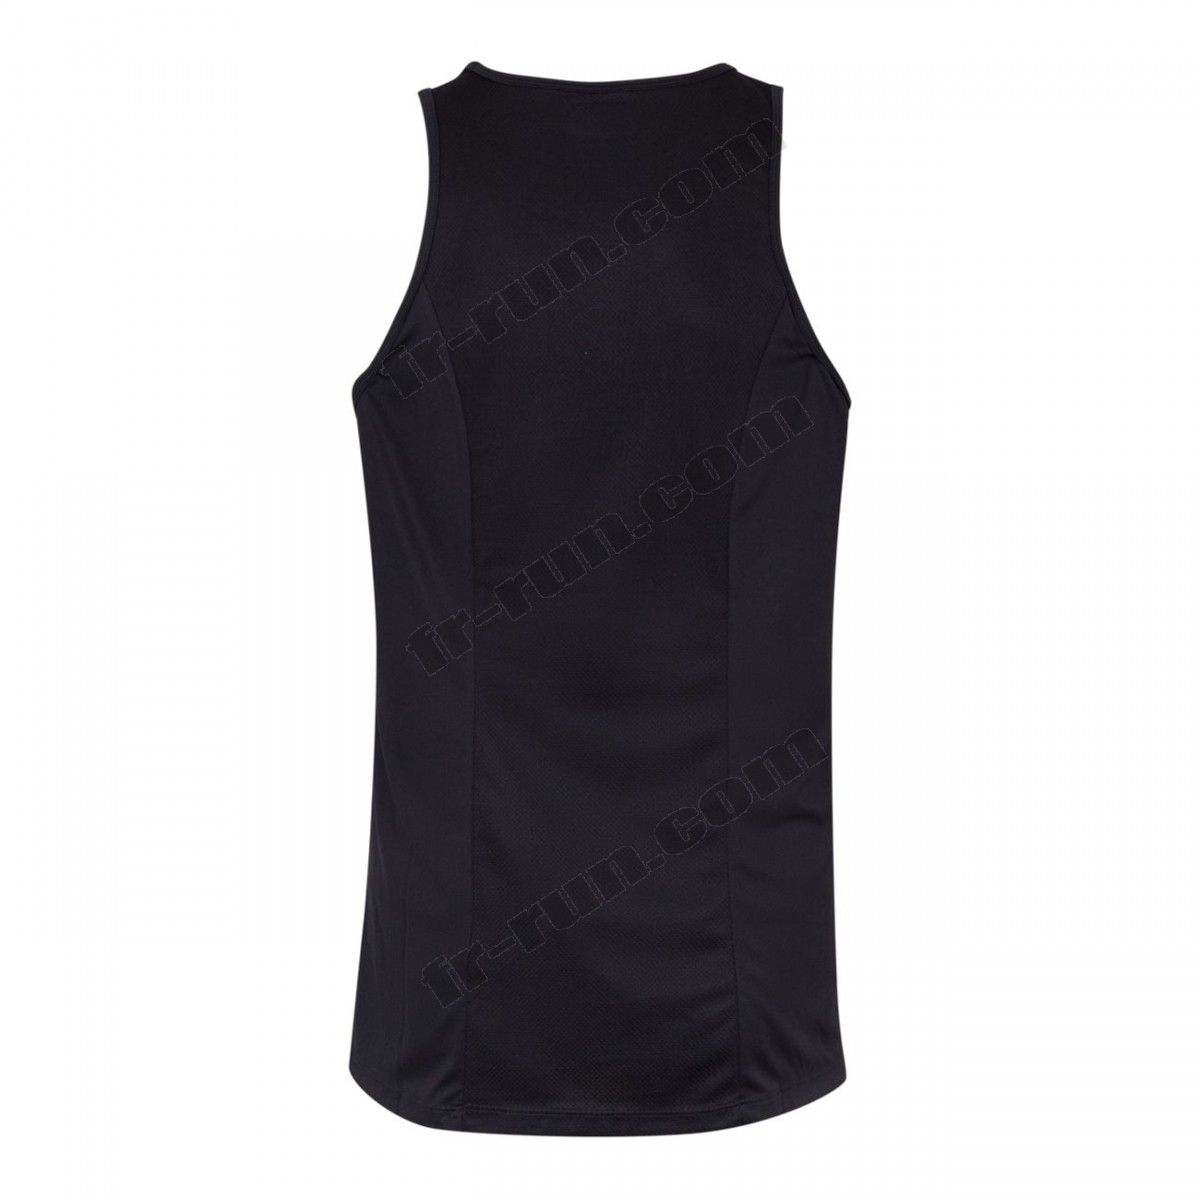 Kappa/running homme KAPPA Maillot manches courtes FANTO - Noir - Homme √ Nouveau style √ Soldes - -6